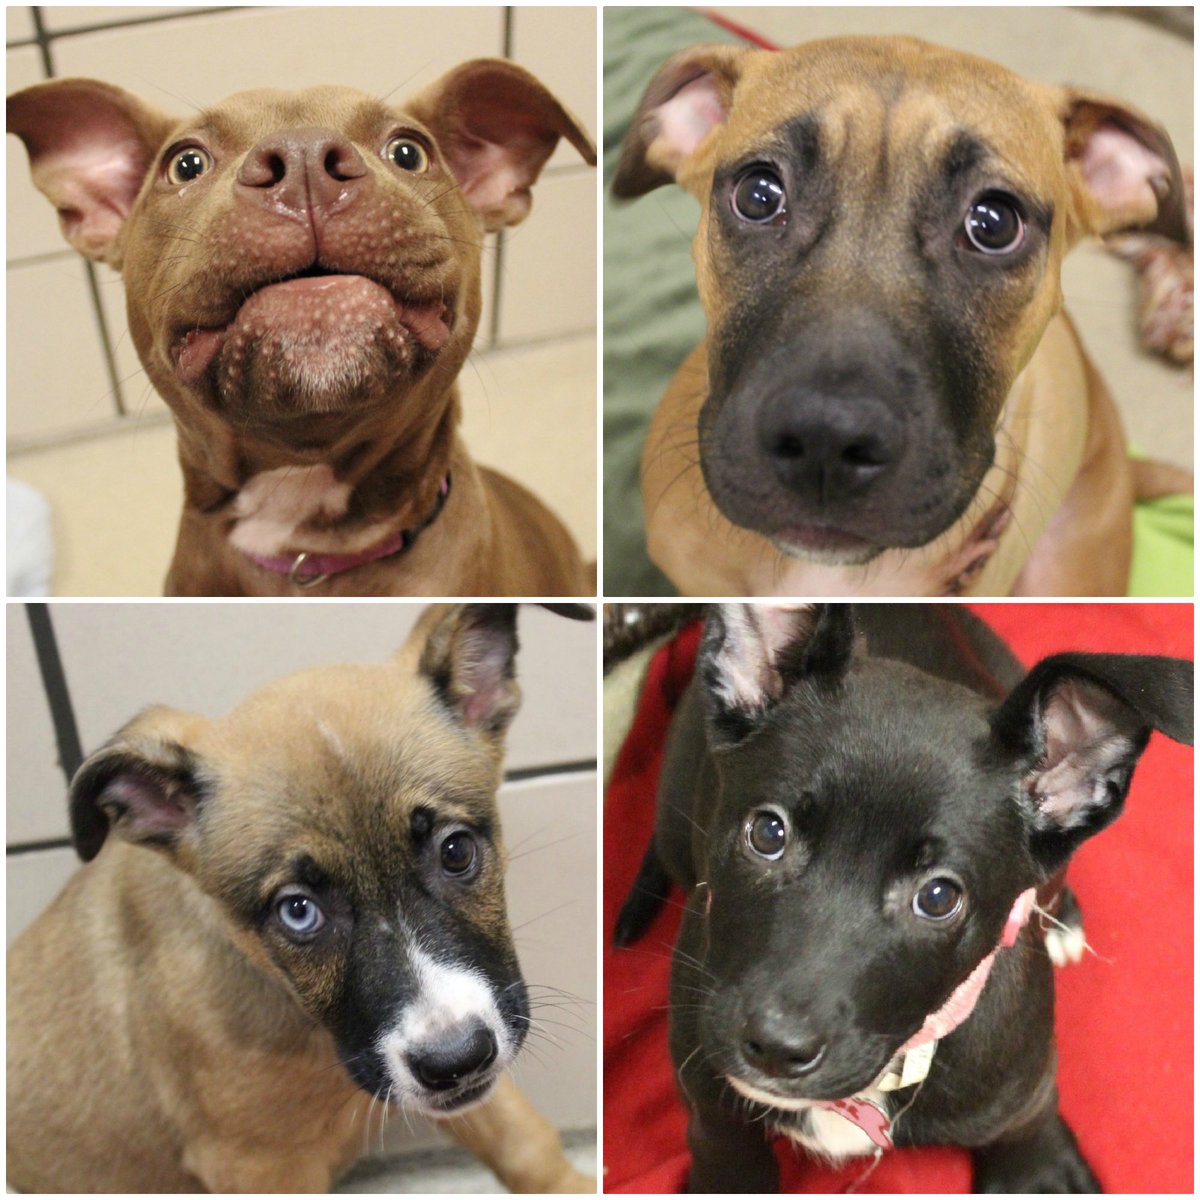 Fort Wayne Animal Care Control On Twitter Puppies Puppies Puppies Puppies We Got Puppies And Dogs Lots Of Dogs Looking For A Home Right Now If You Have Been Waiting To Adopt